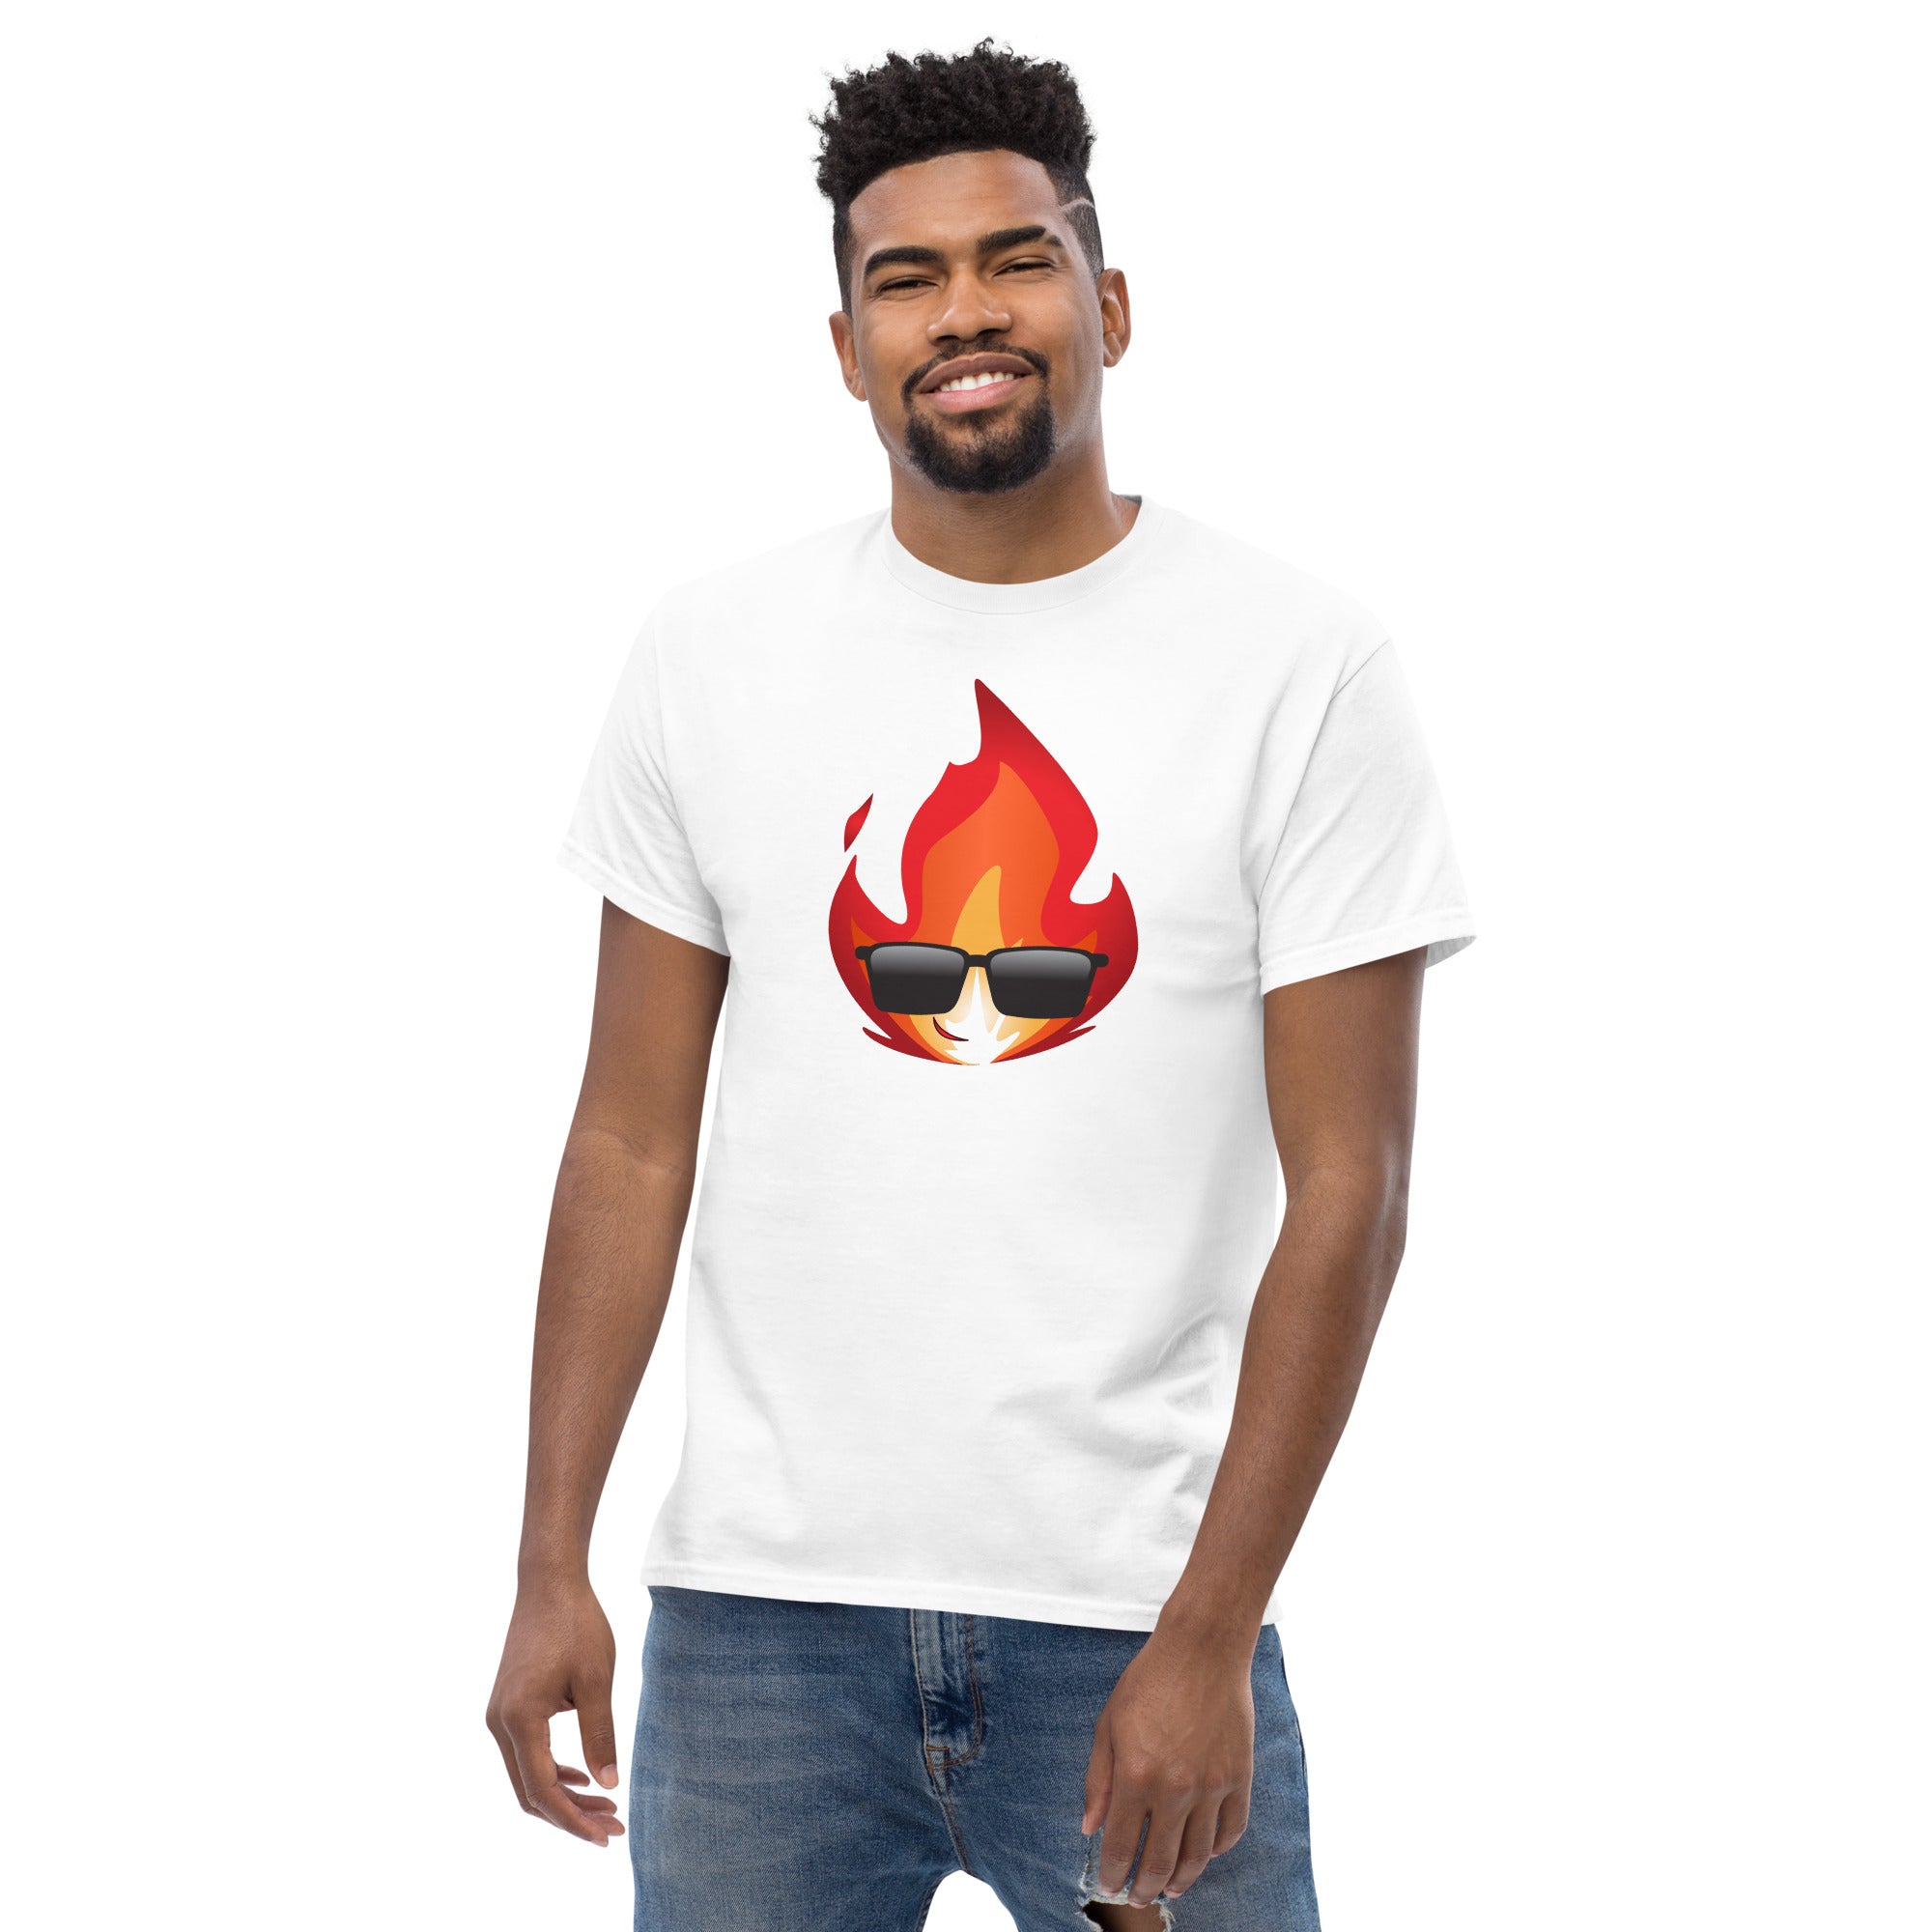 Men's Novelty T Shirts Graphic - Cool Fire